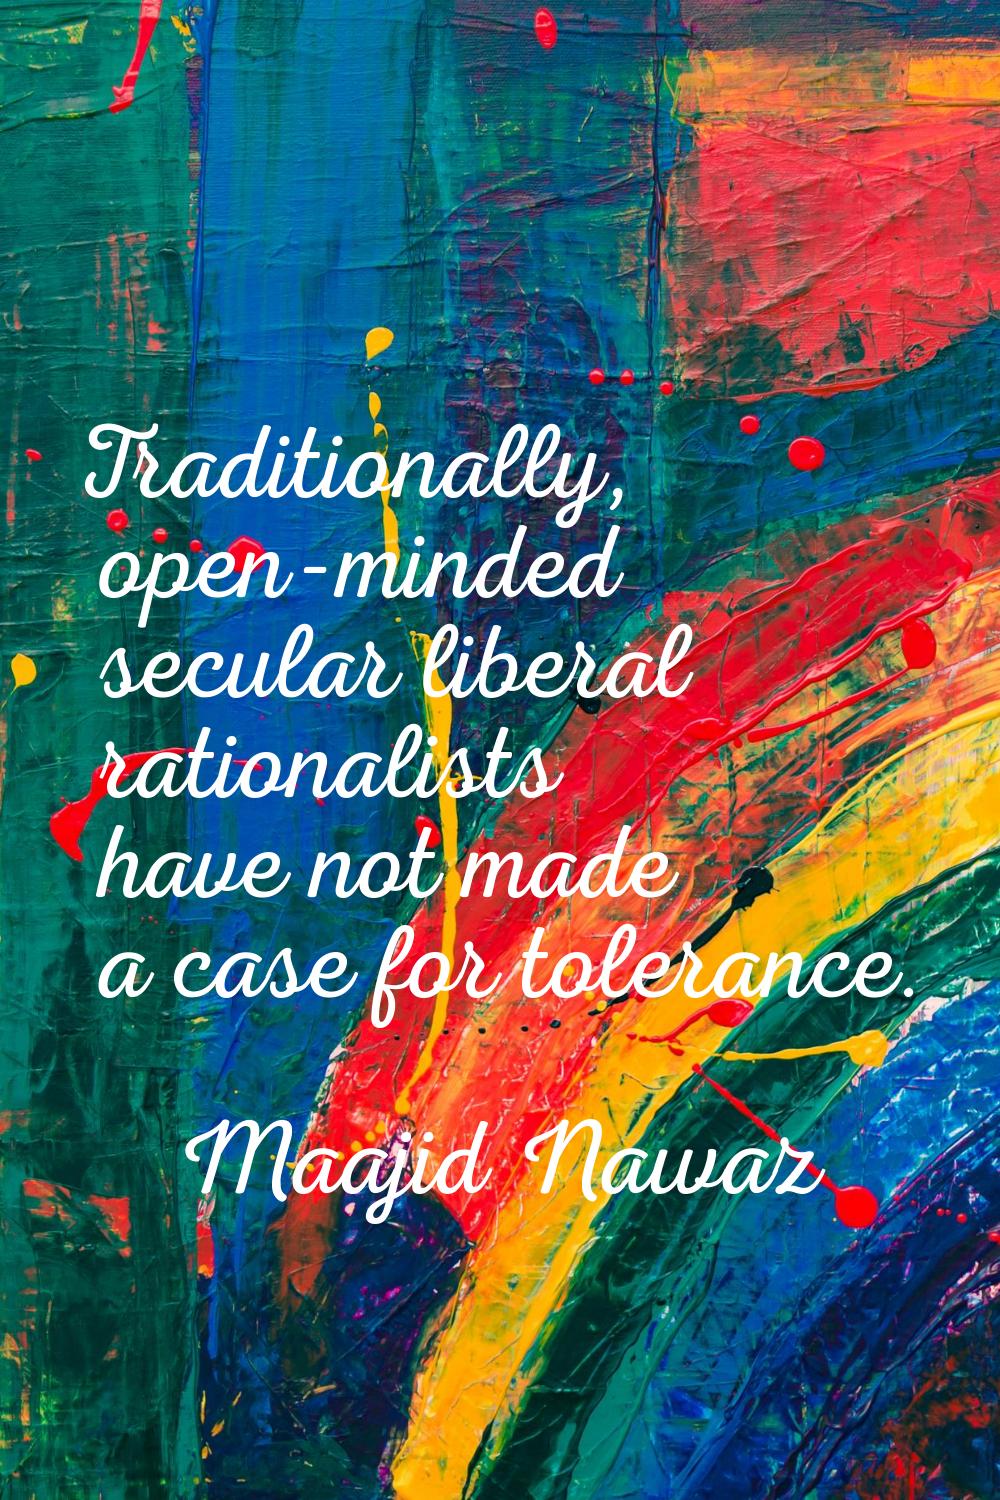 Traditionally, open-minded secular liberal rationalists have not made a case for tolerance.